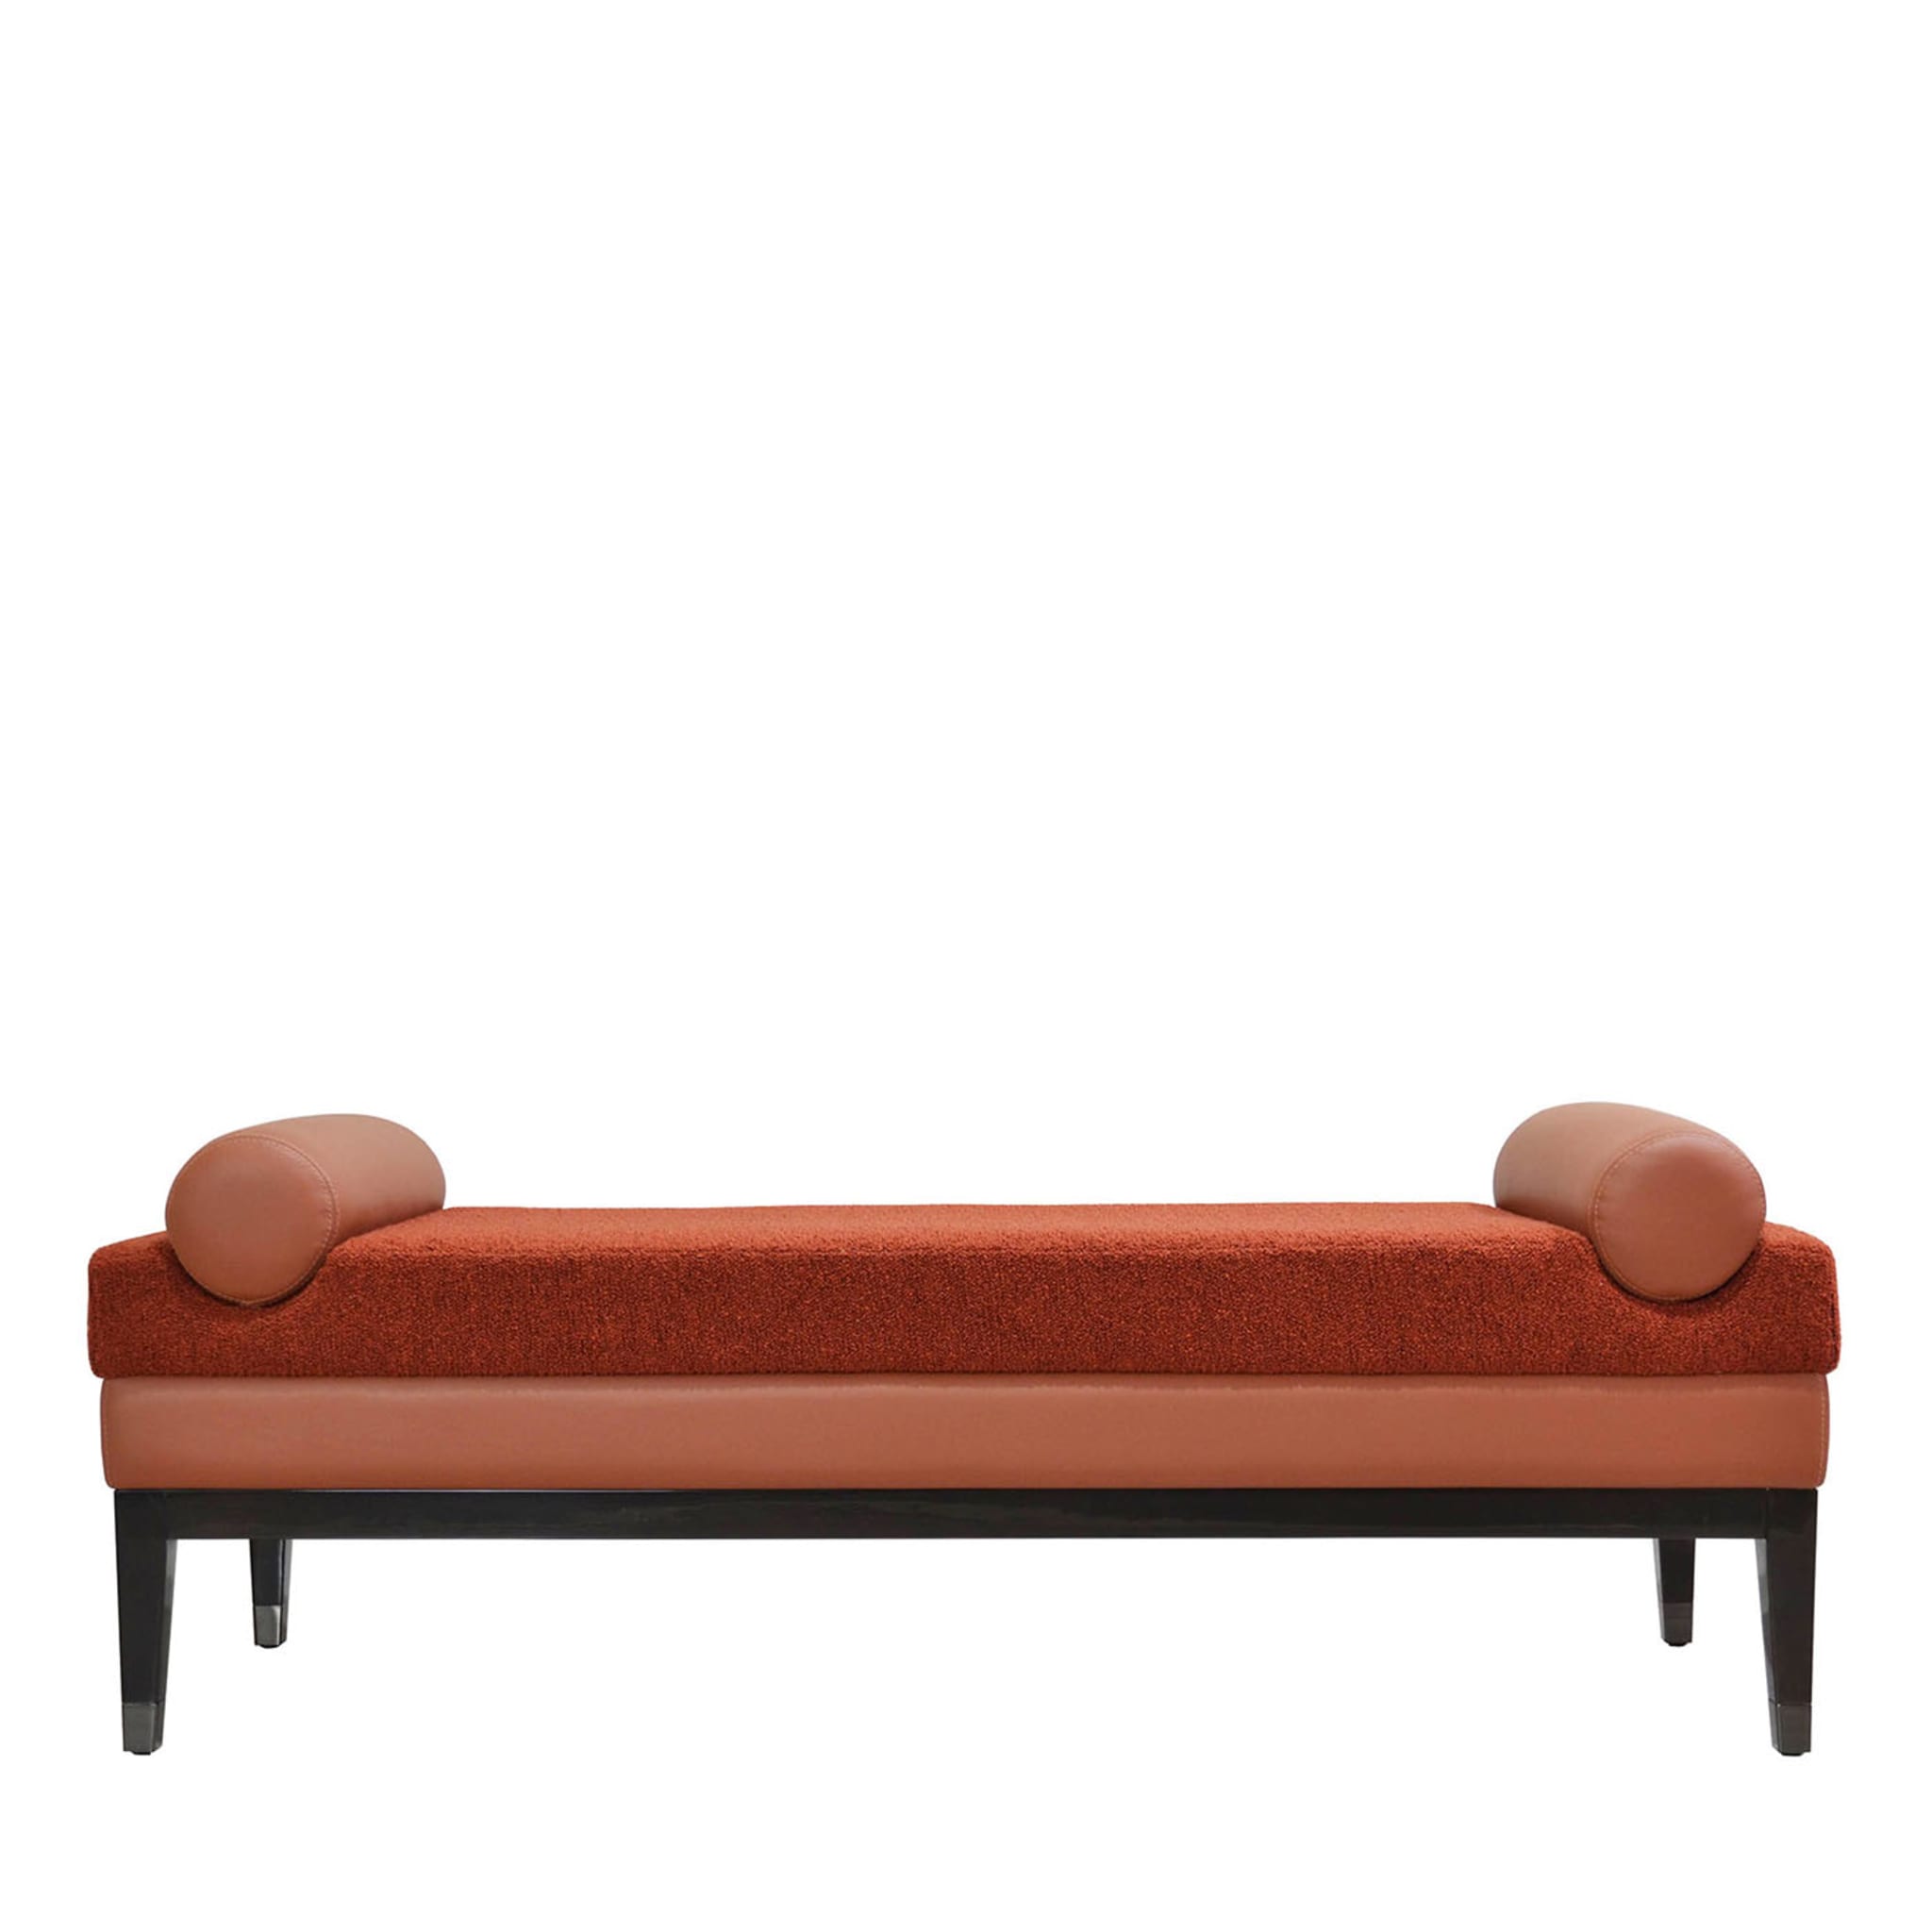 Italian Contemporary Upholstered Bench In Terracotta Fabric  - Main view